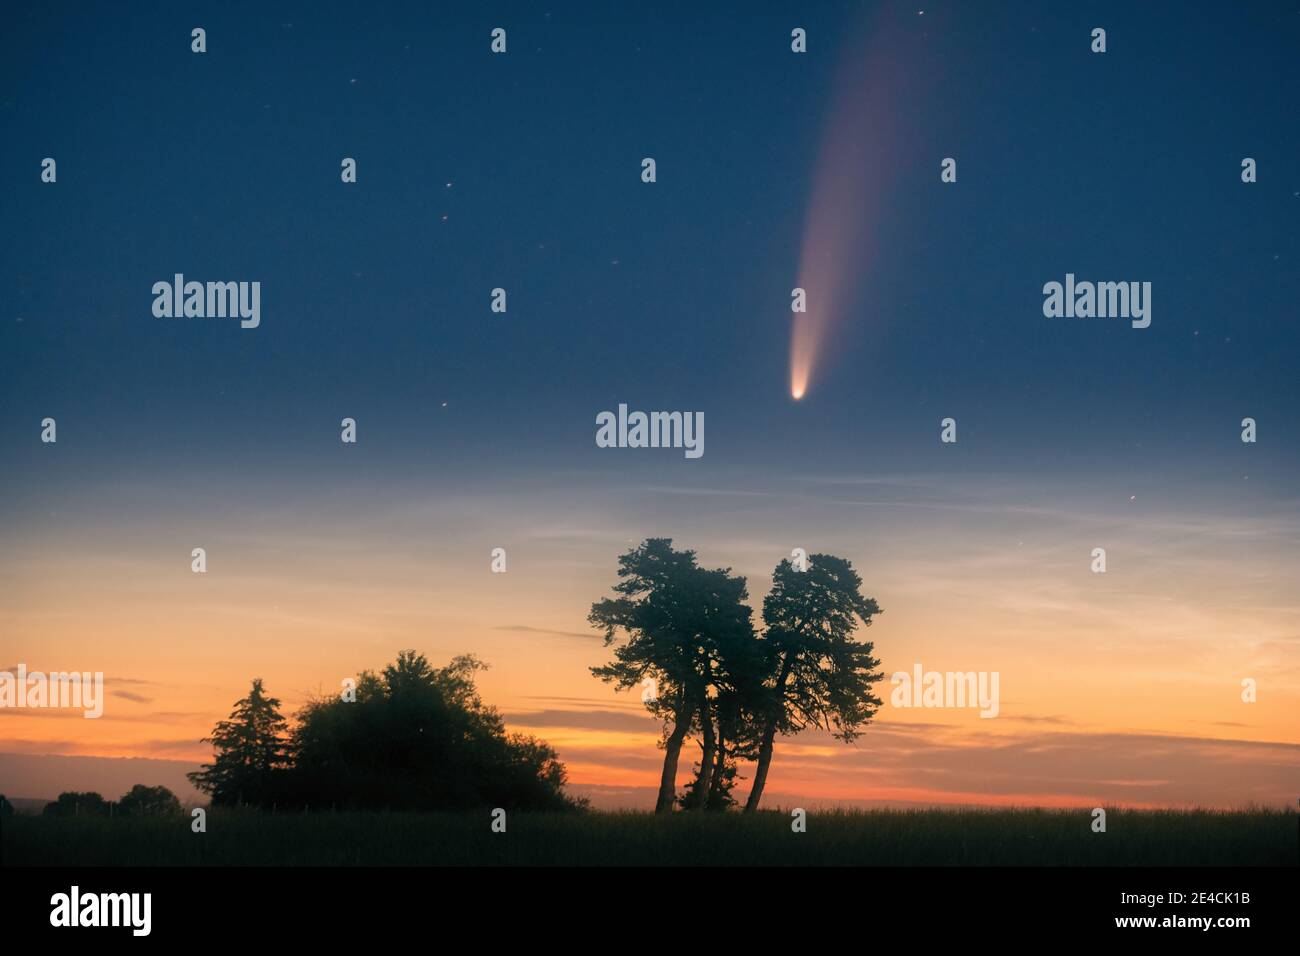 Comet Neowiese in the night sky just before sunrise Stock Photo